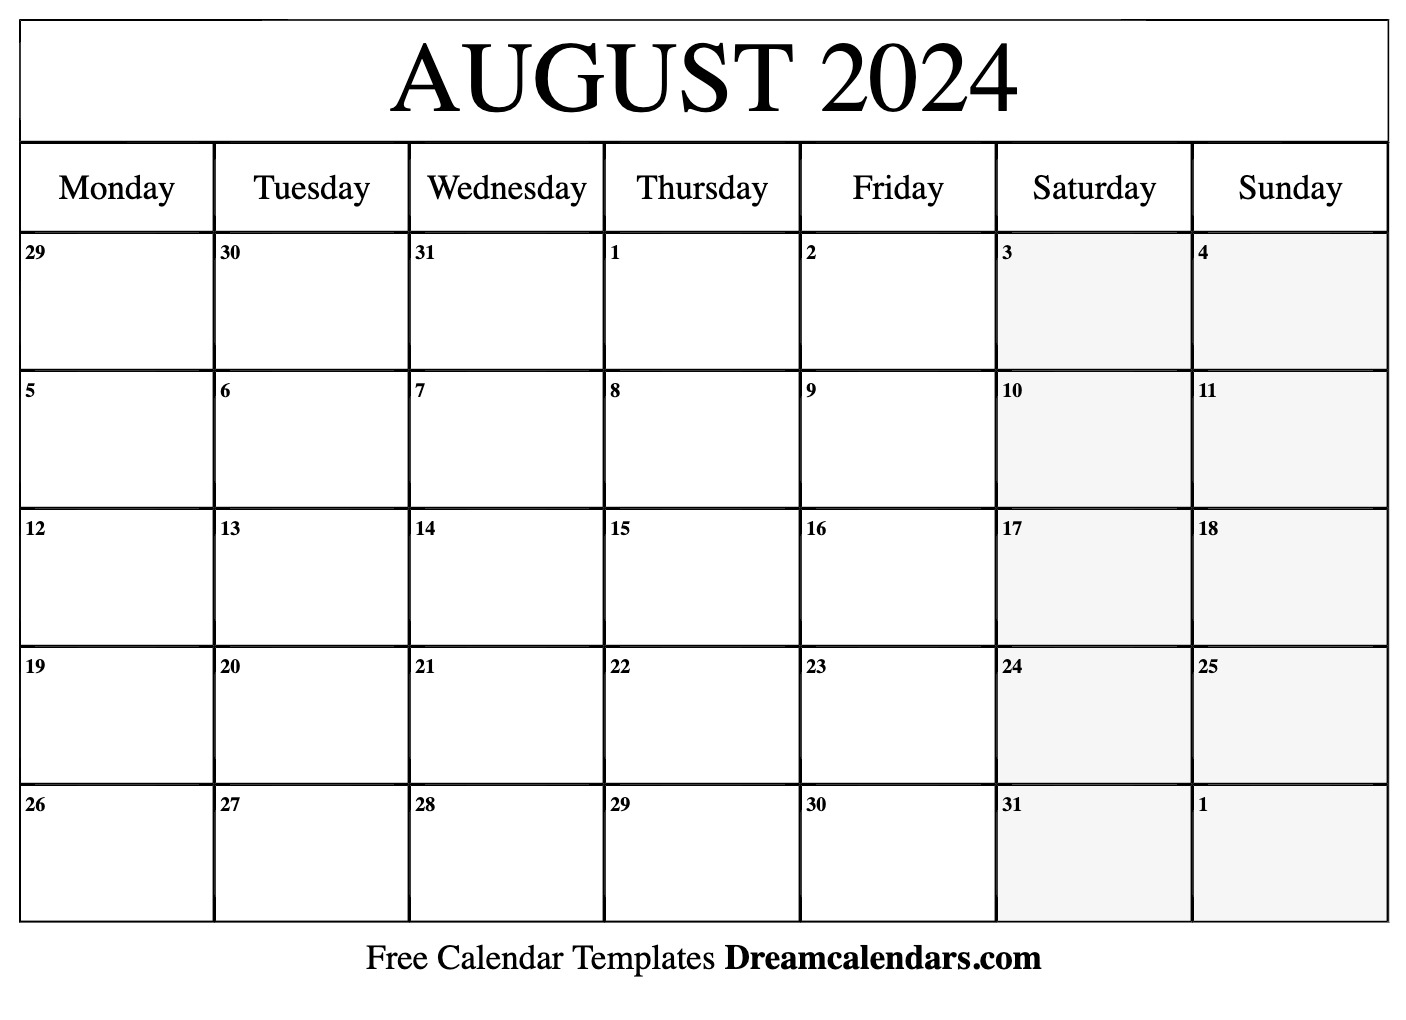 August 2024 Calendar | Free Blank Printable With Holidays for Free Printable Calendar 2024 August